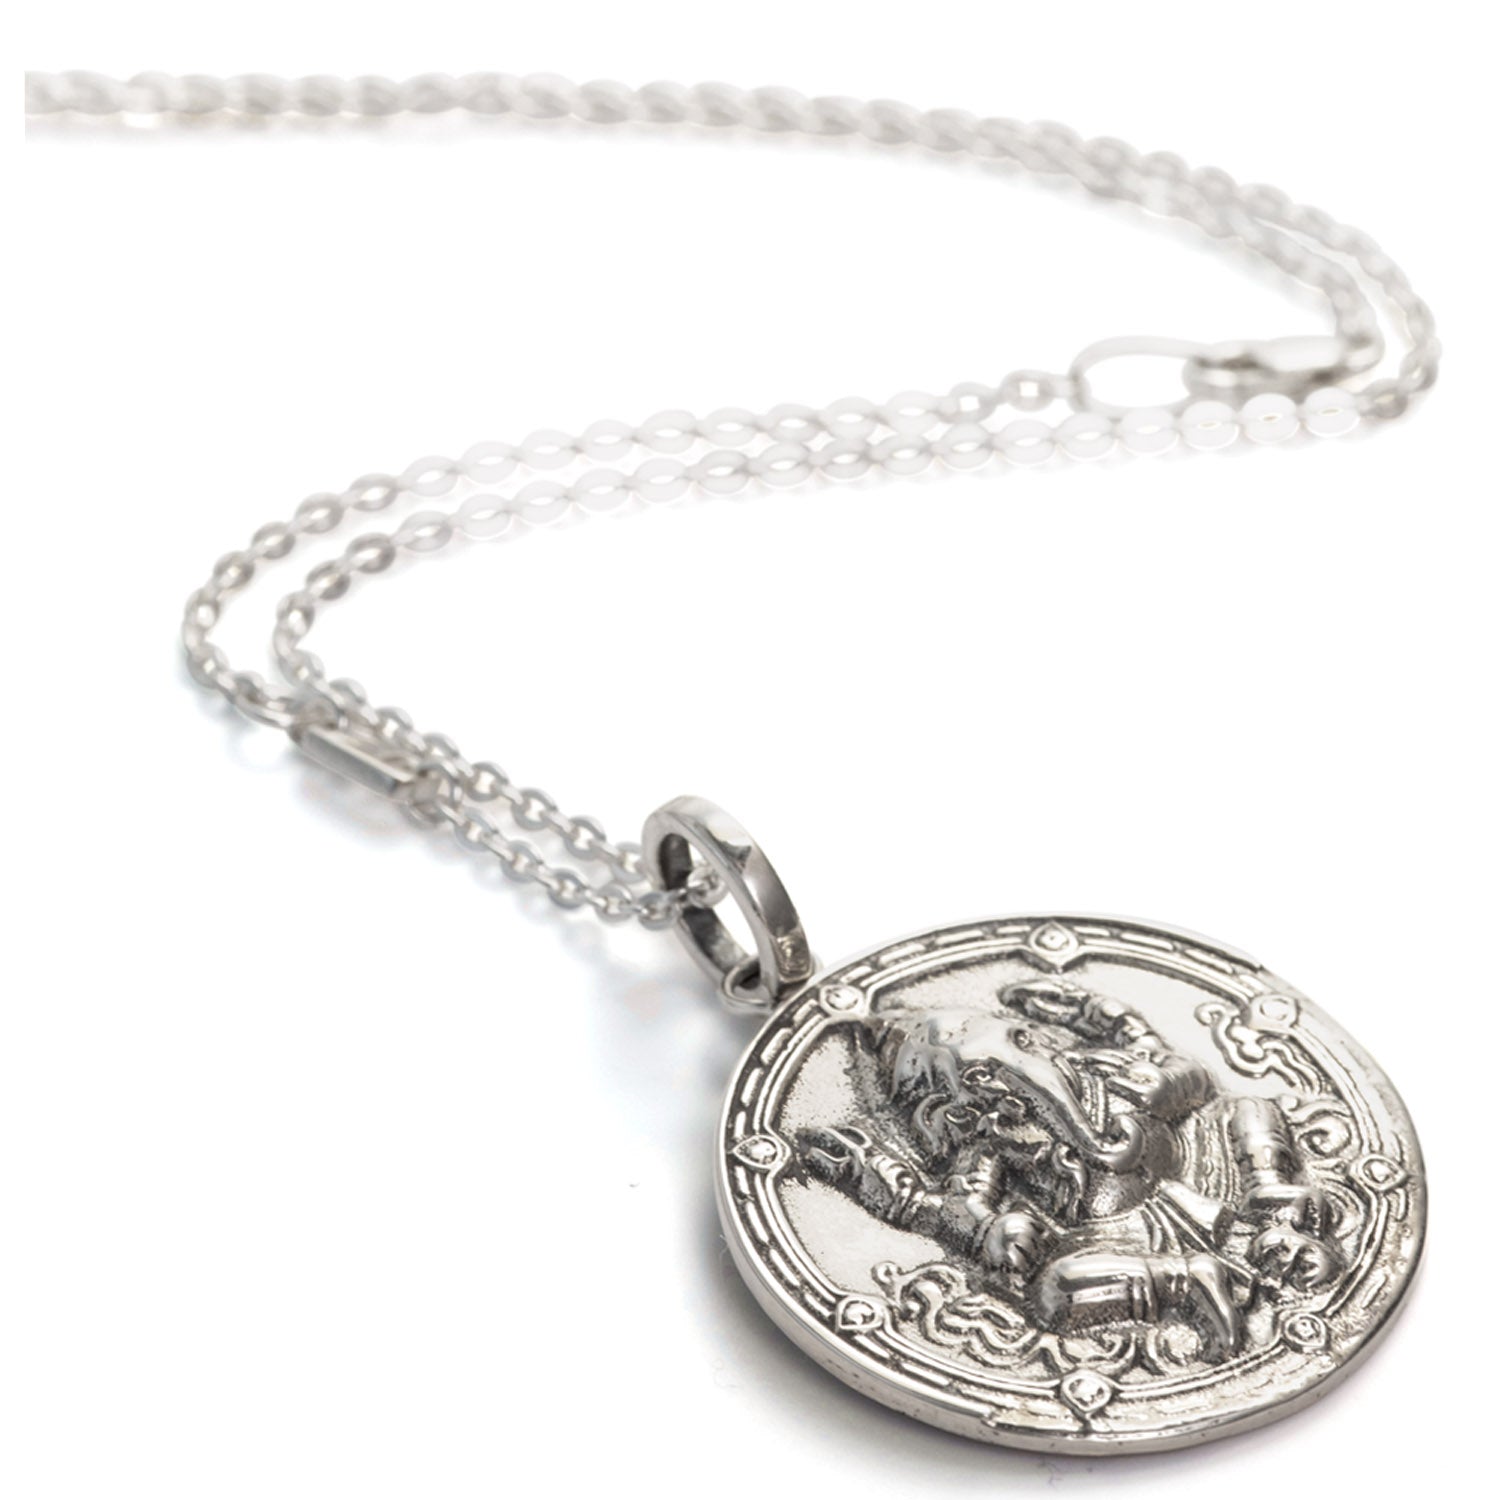 Ganesha necklace Silver  by ETERNAL BLISS - Spiritual Jewellery